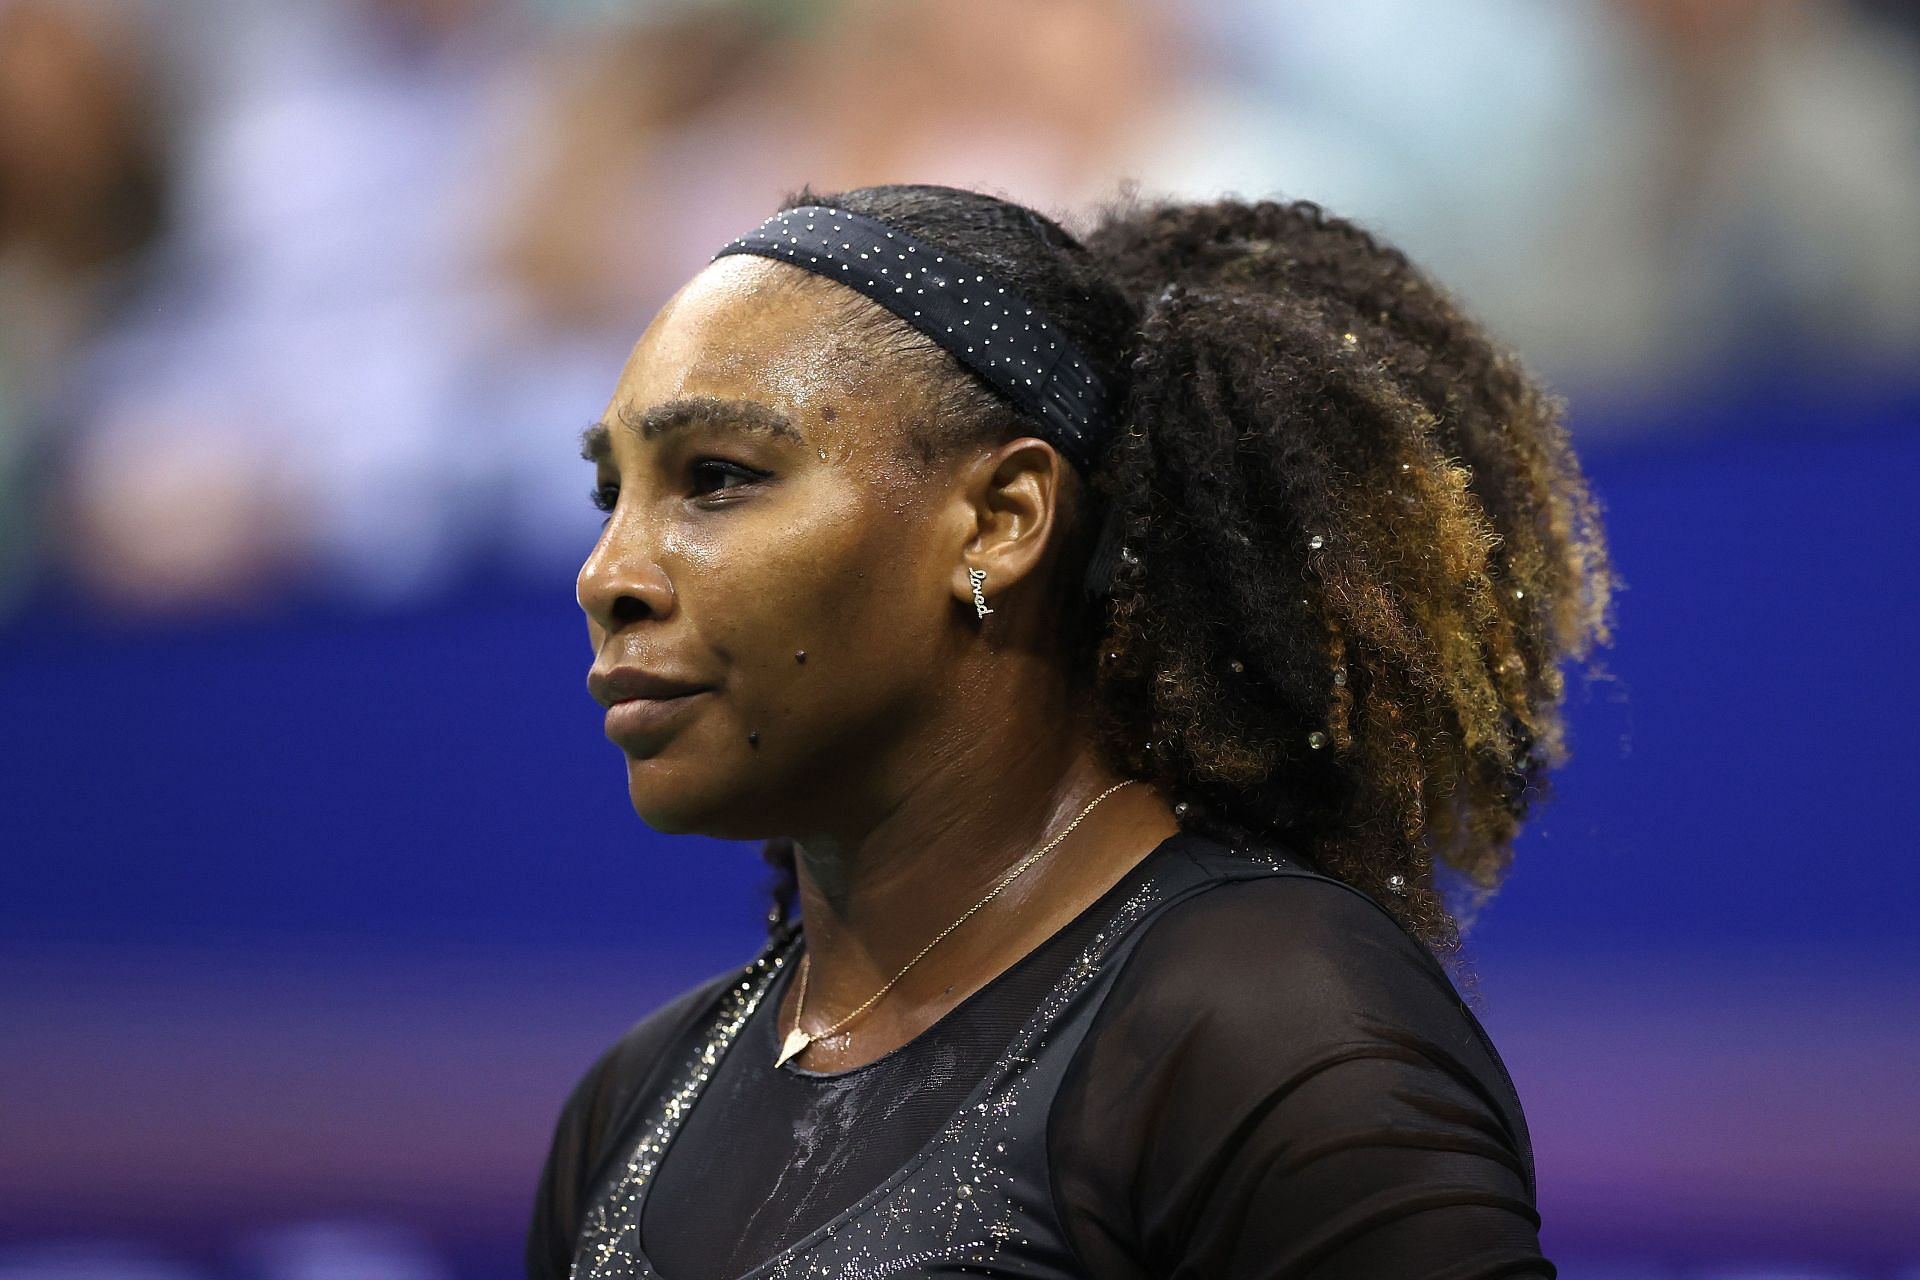 Serena Williams pictured during her match against Ajla Tomlijanovic at the 2022 US Open